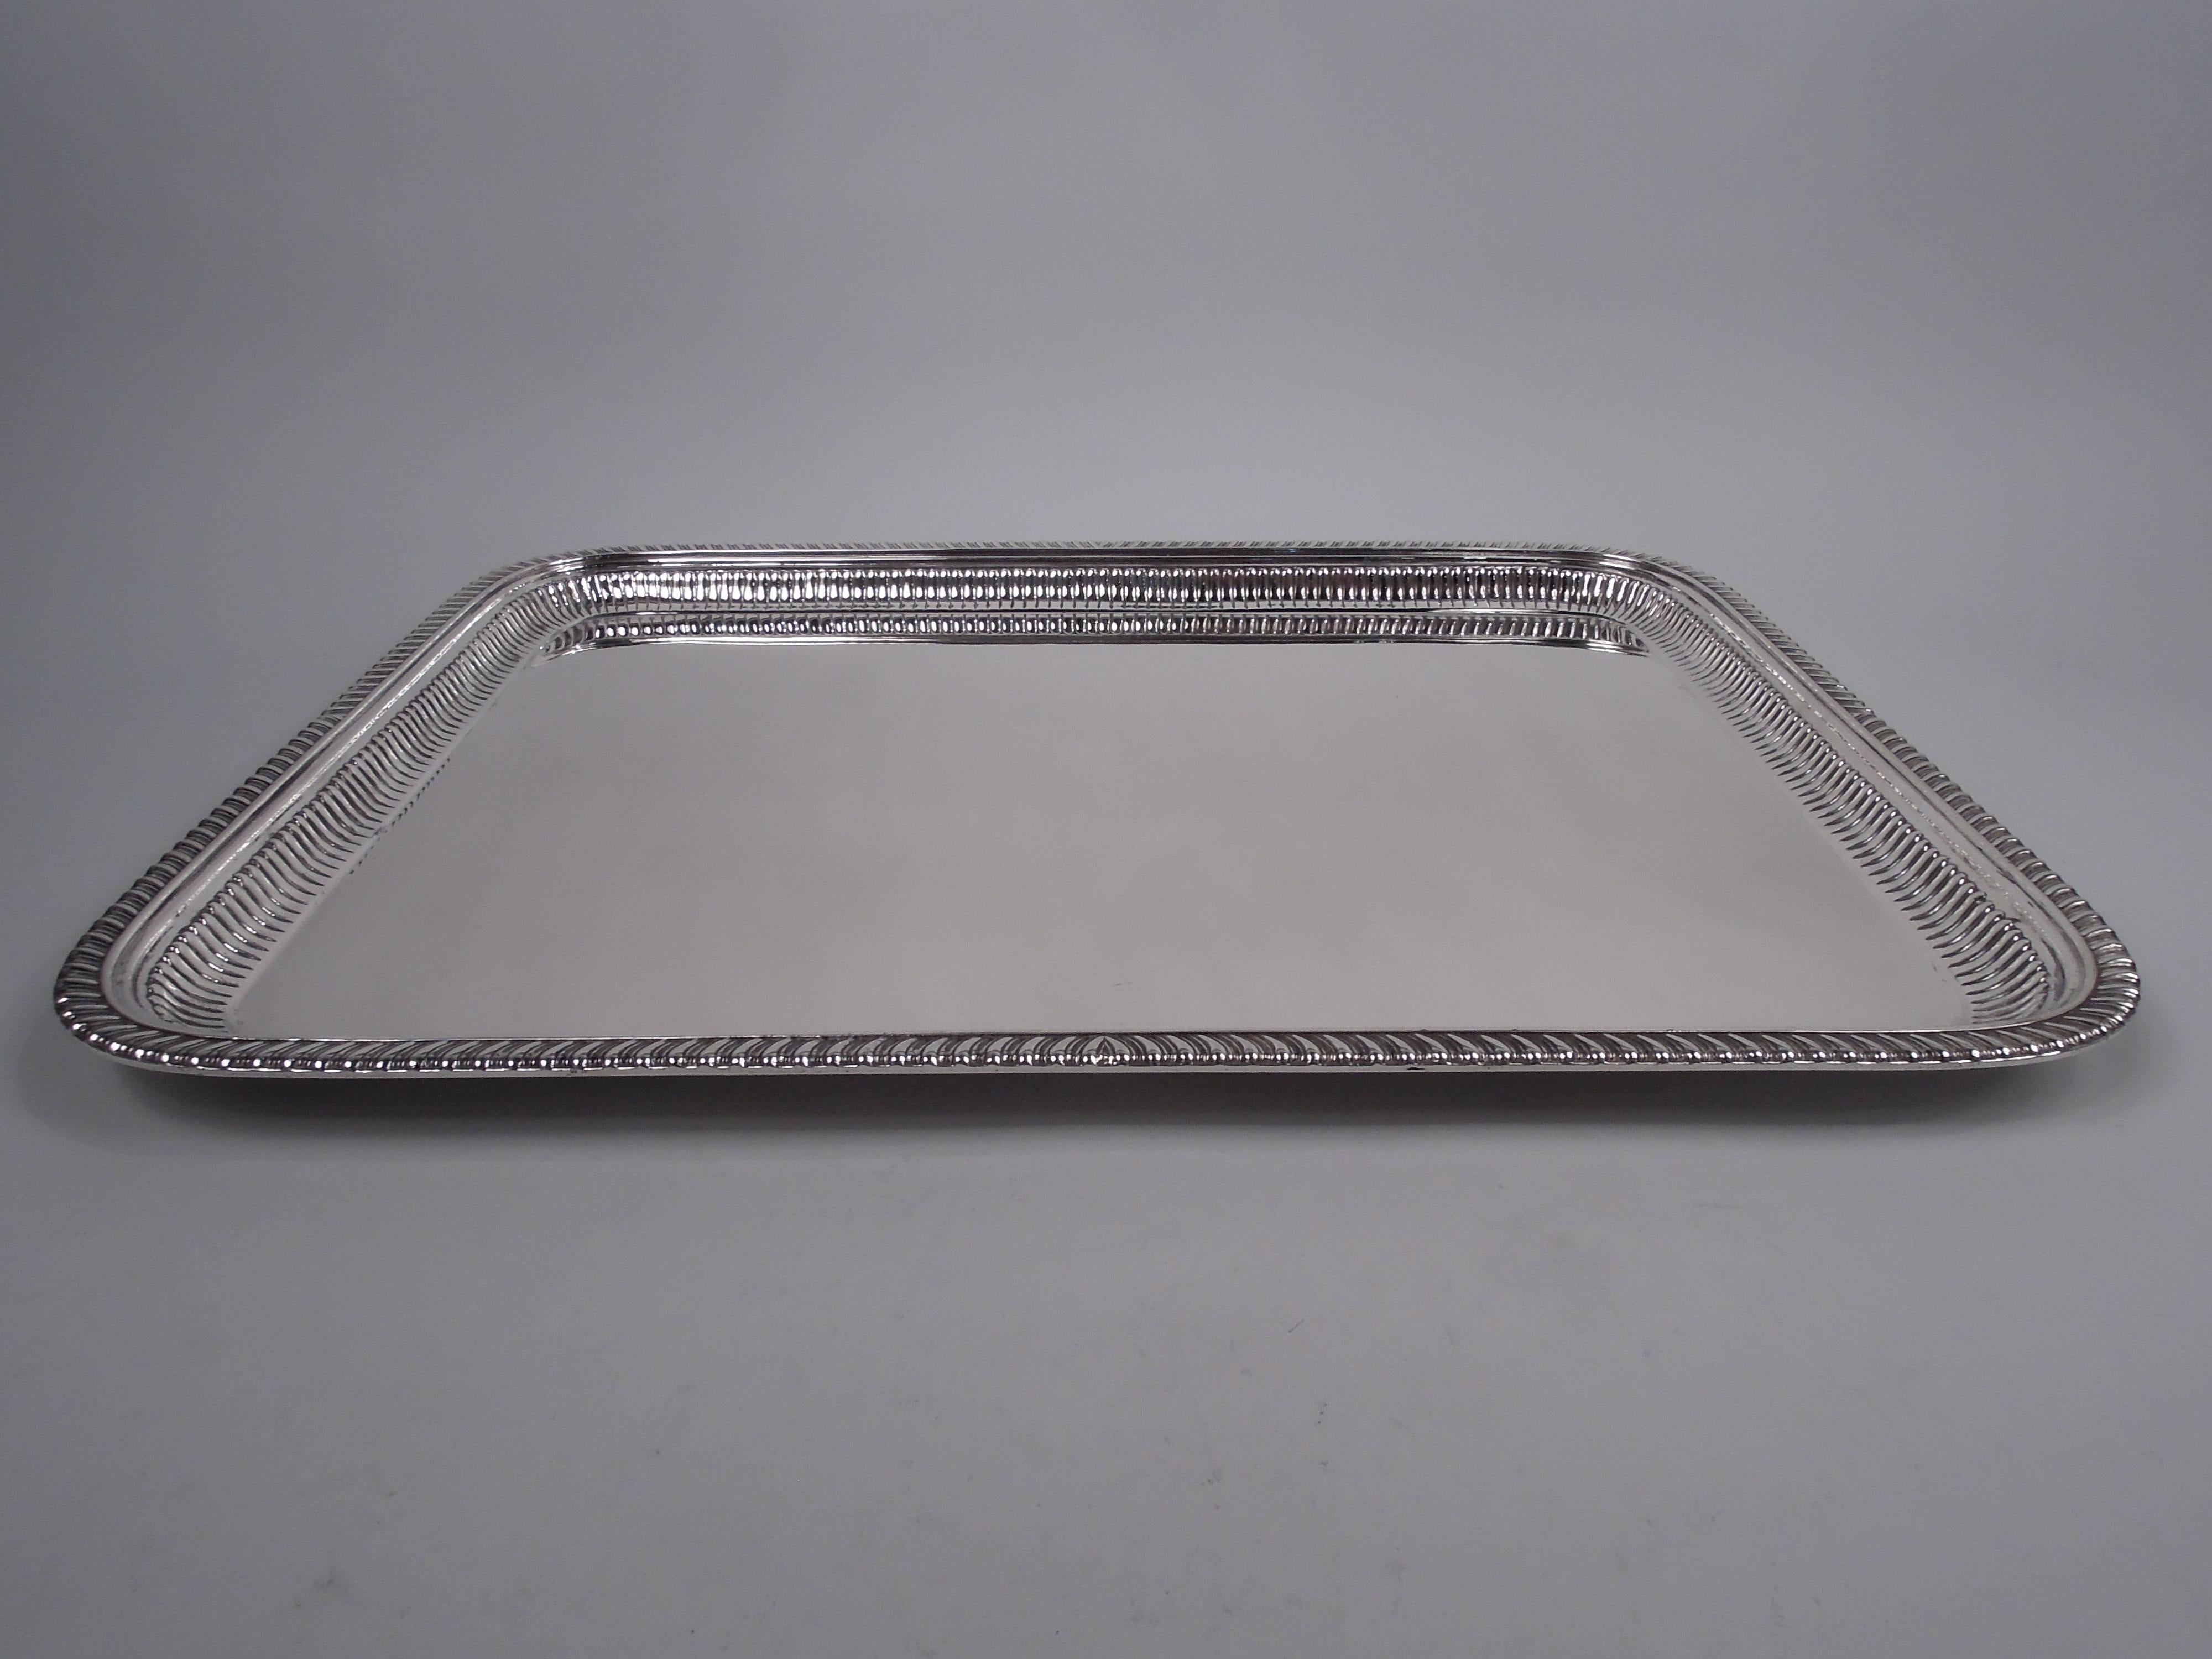 Large Victorian Classical sterling silver tray. Made by Dominick & Haff in New York in 1890. Rectangular with curved corners. Fluted sides and gadrooned rim. Stylistically restrained with nice heft. Fully marked including dated maker’s stamp,